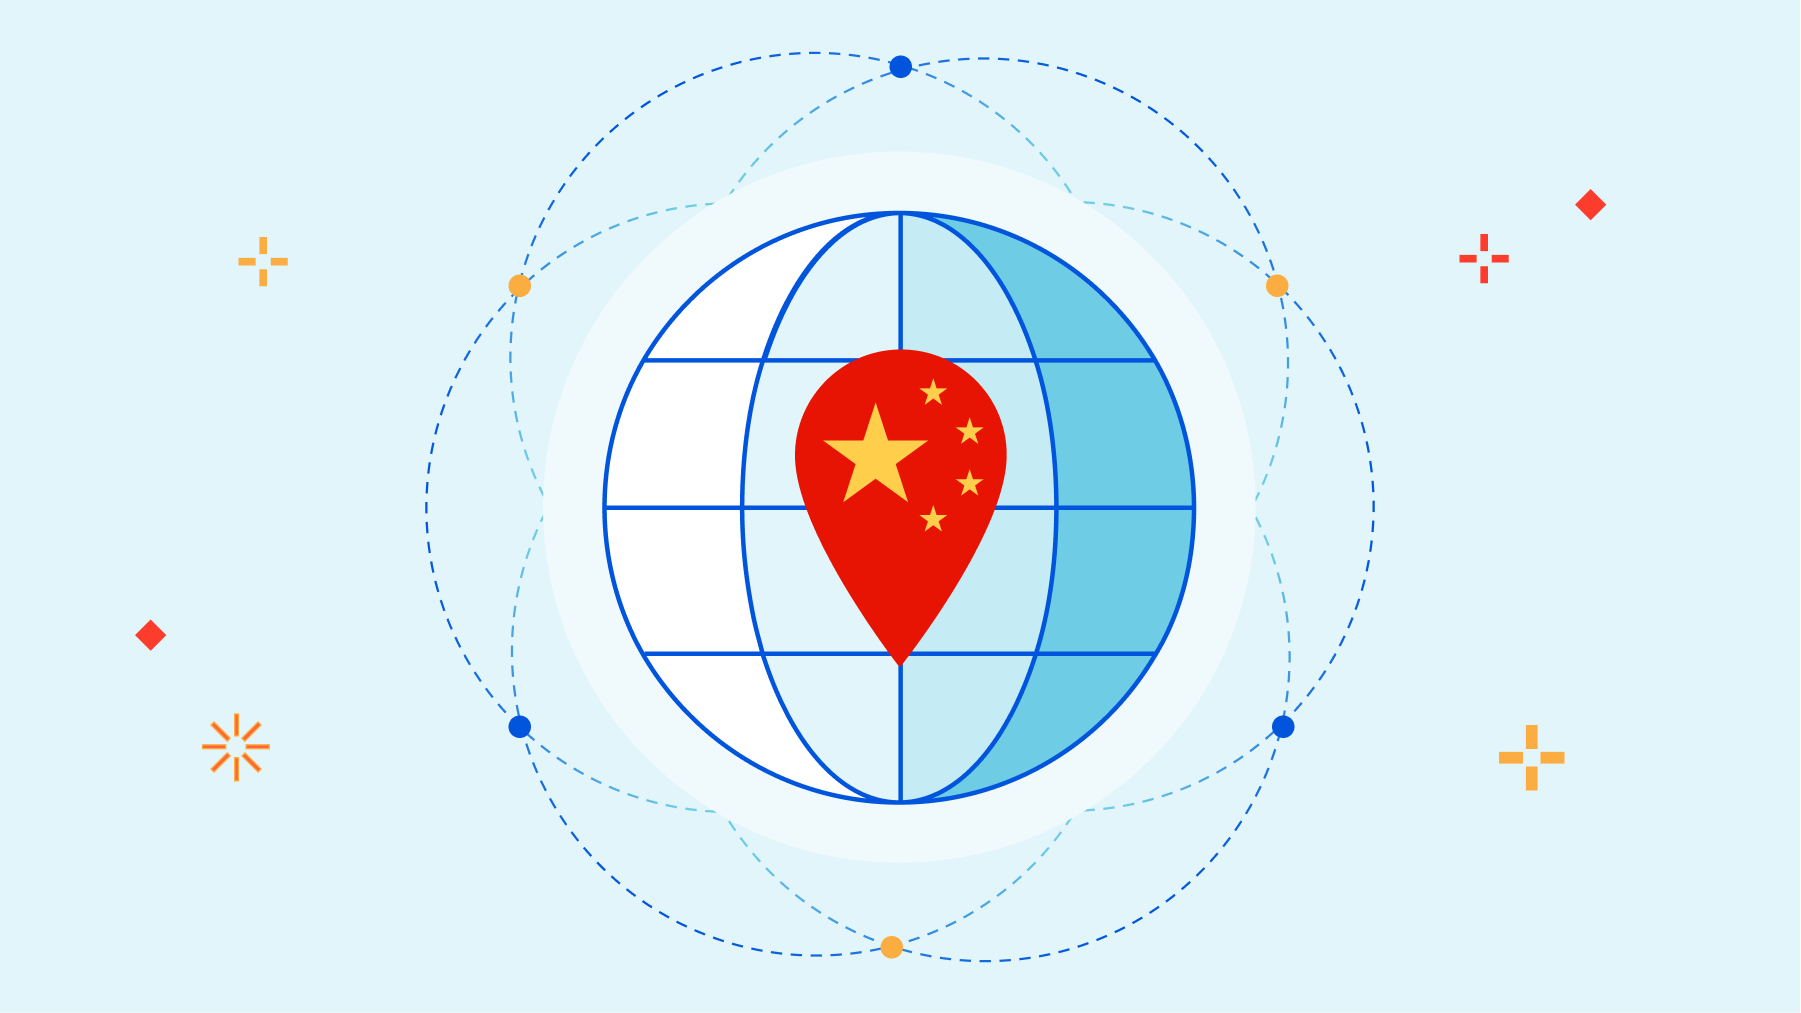 Cloudflare partners to simplify China connectivity for corporate networks